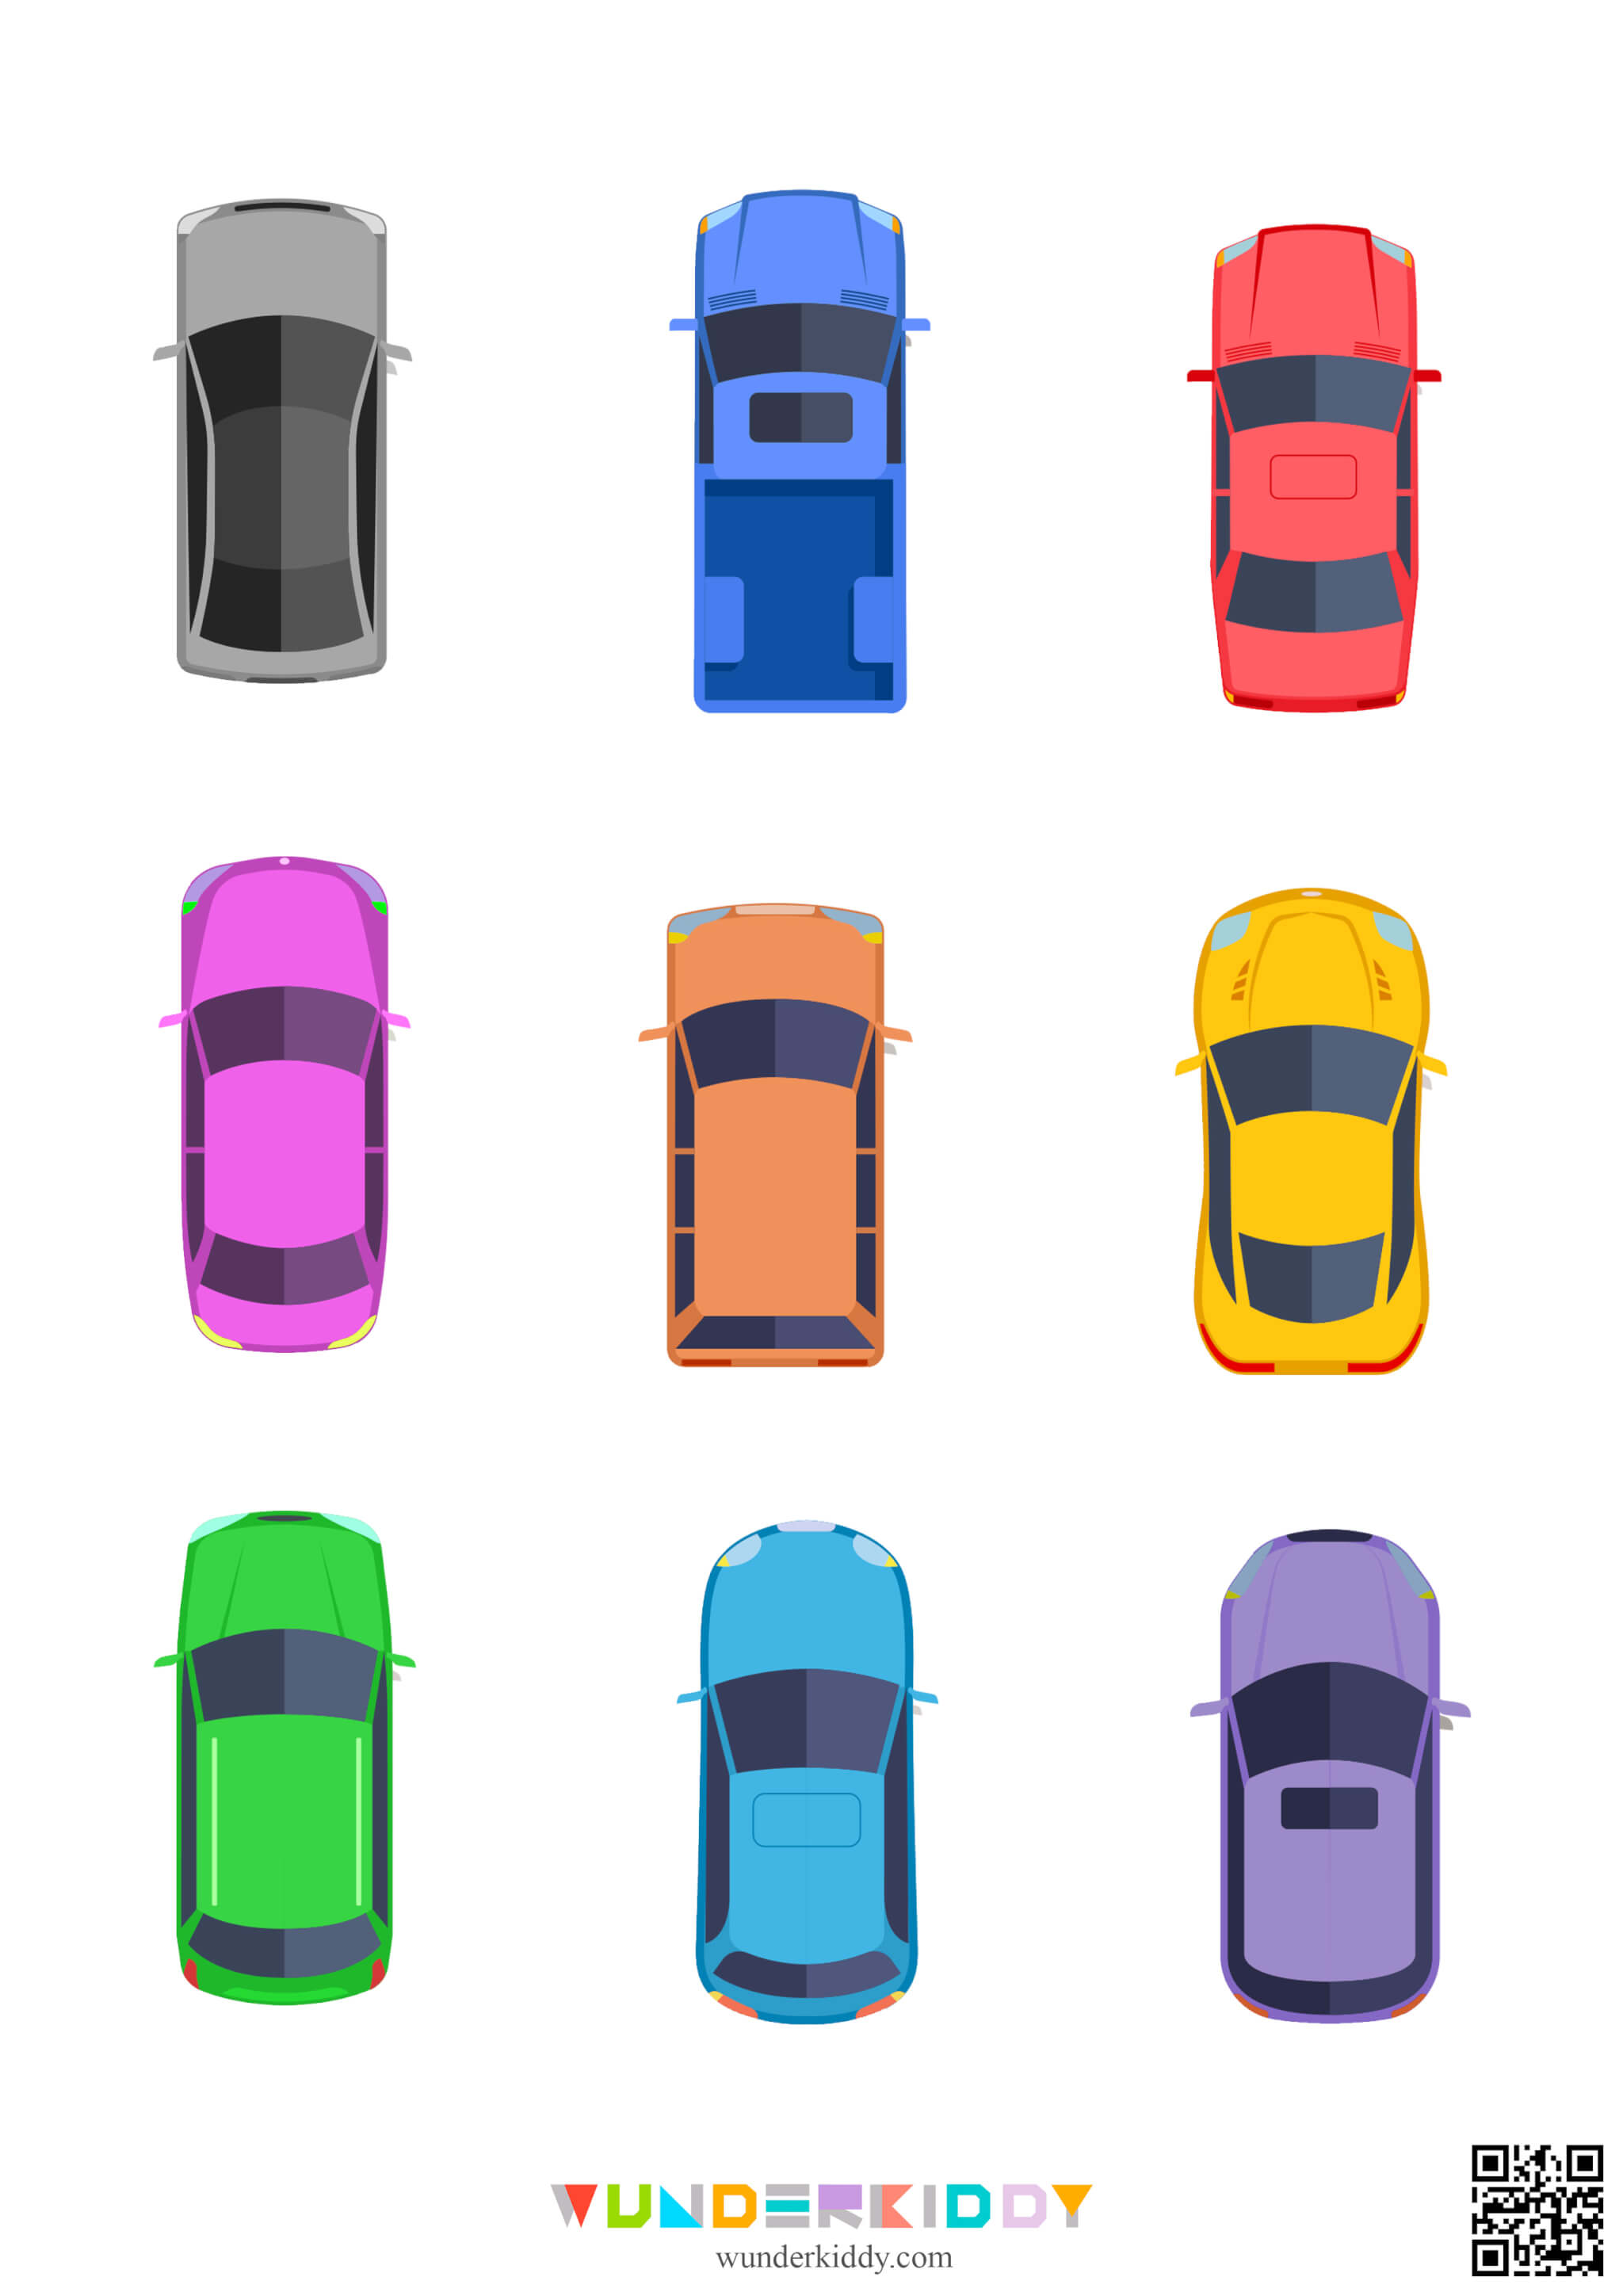 Parking Colors Matching Game - Image 3